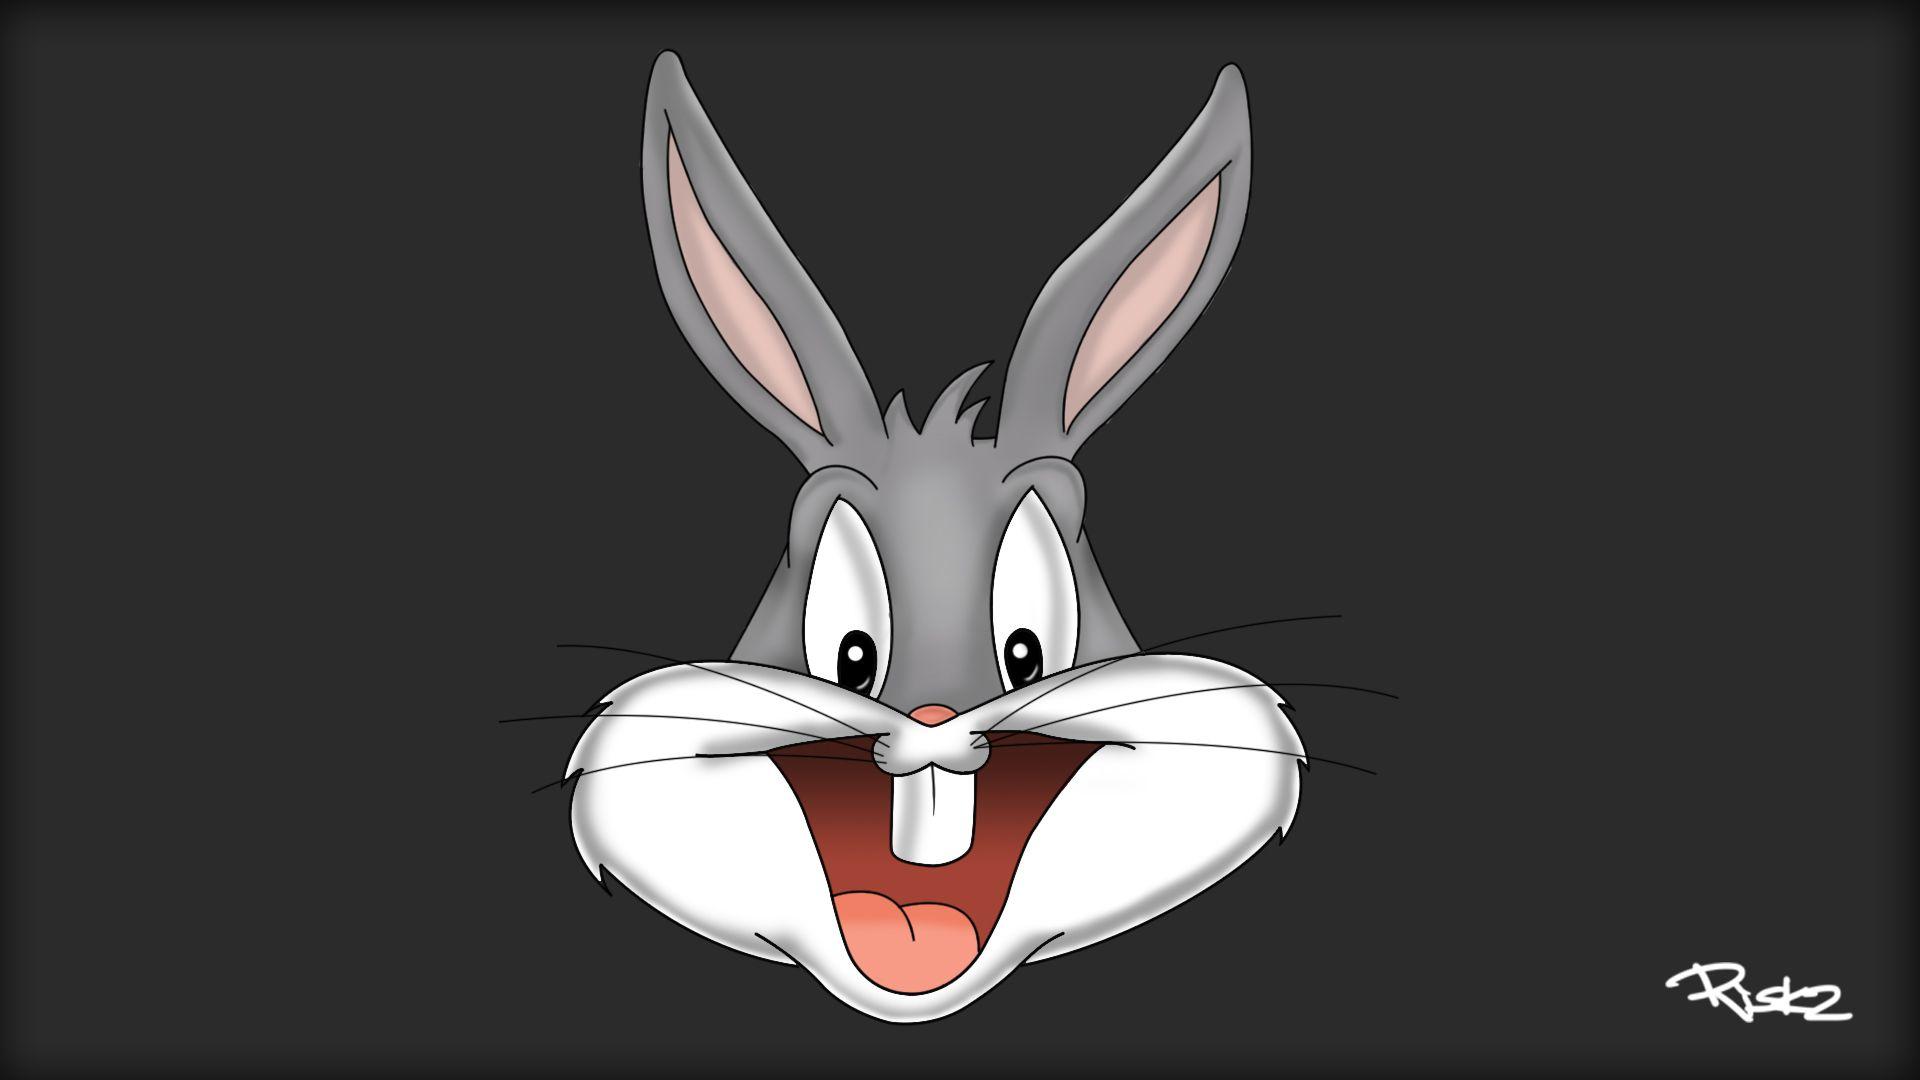 Cool Bugs Bunny Wallpaper Free Cool Bugs Bunny Background